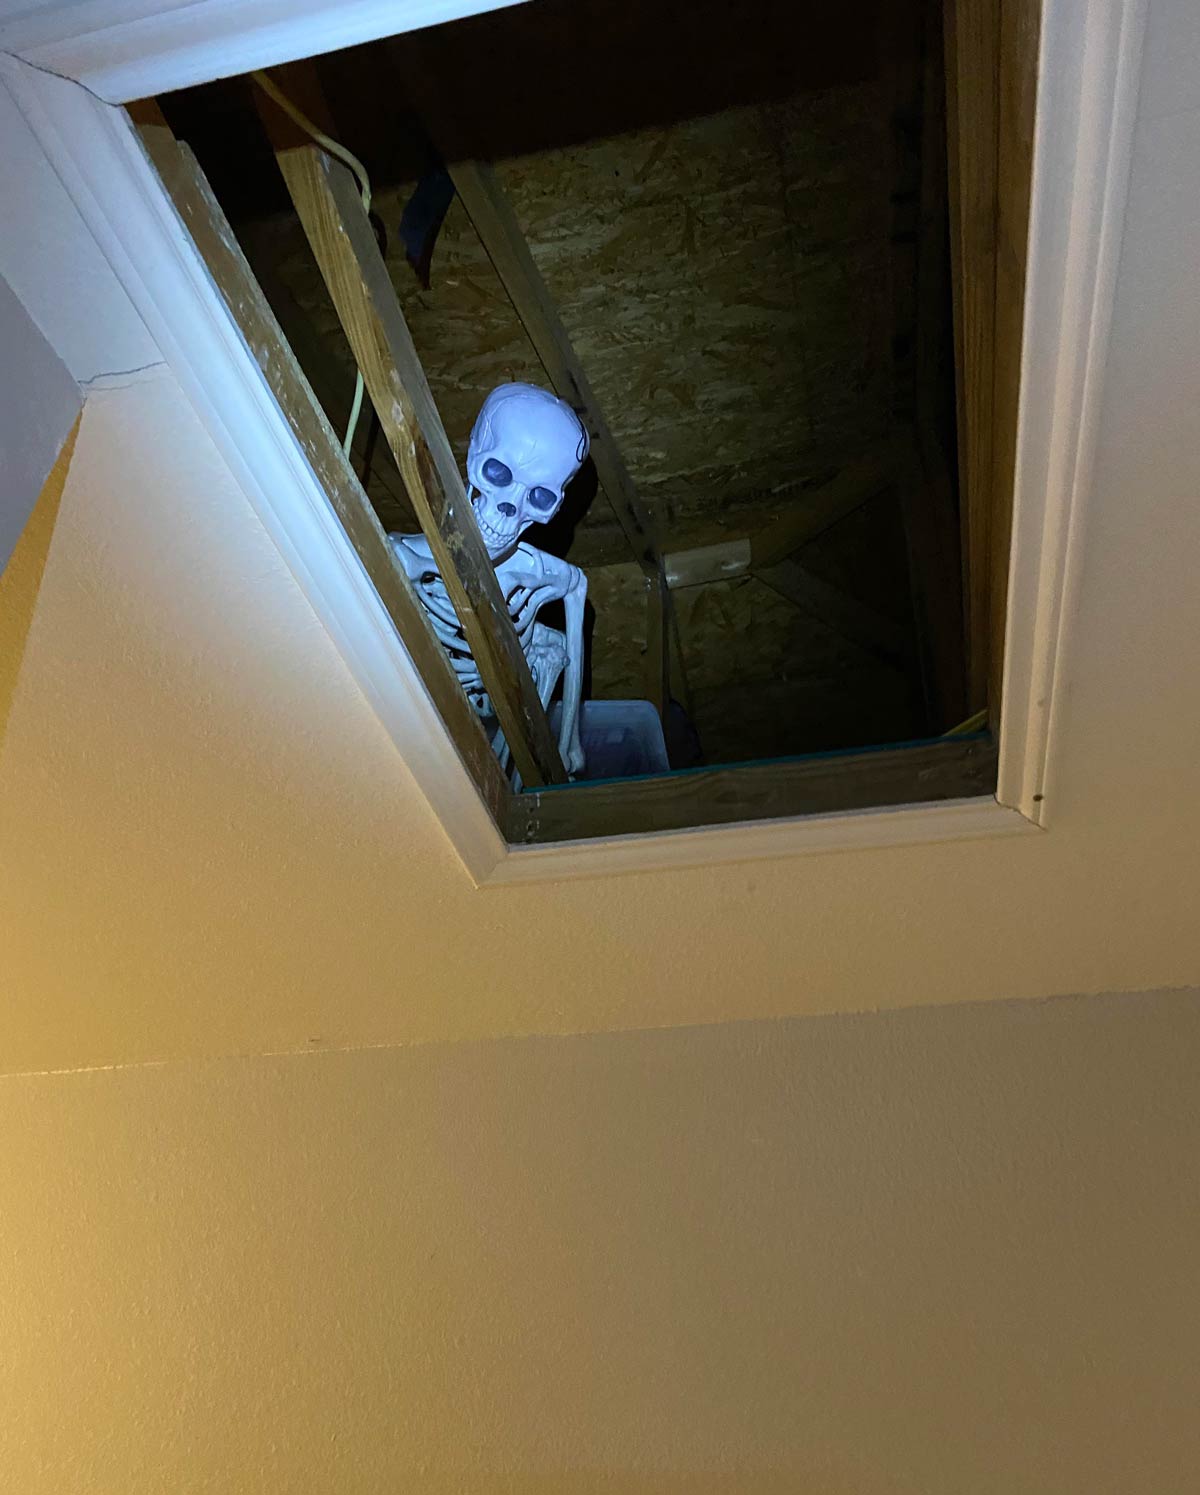 Future me is gonna have a heart attack when he opens up the attic